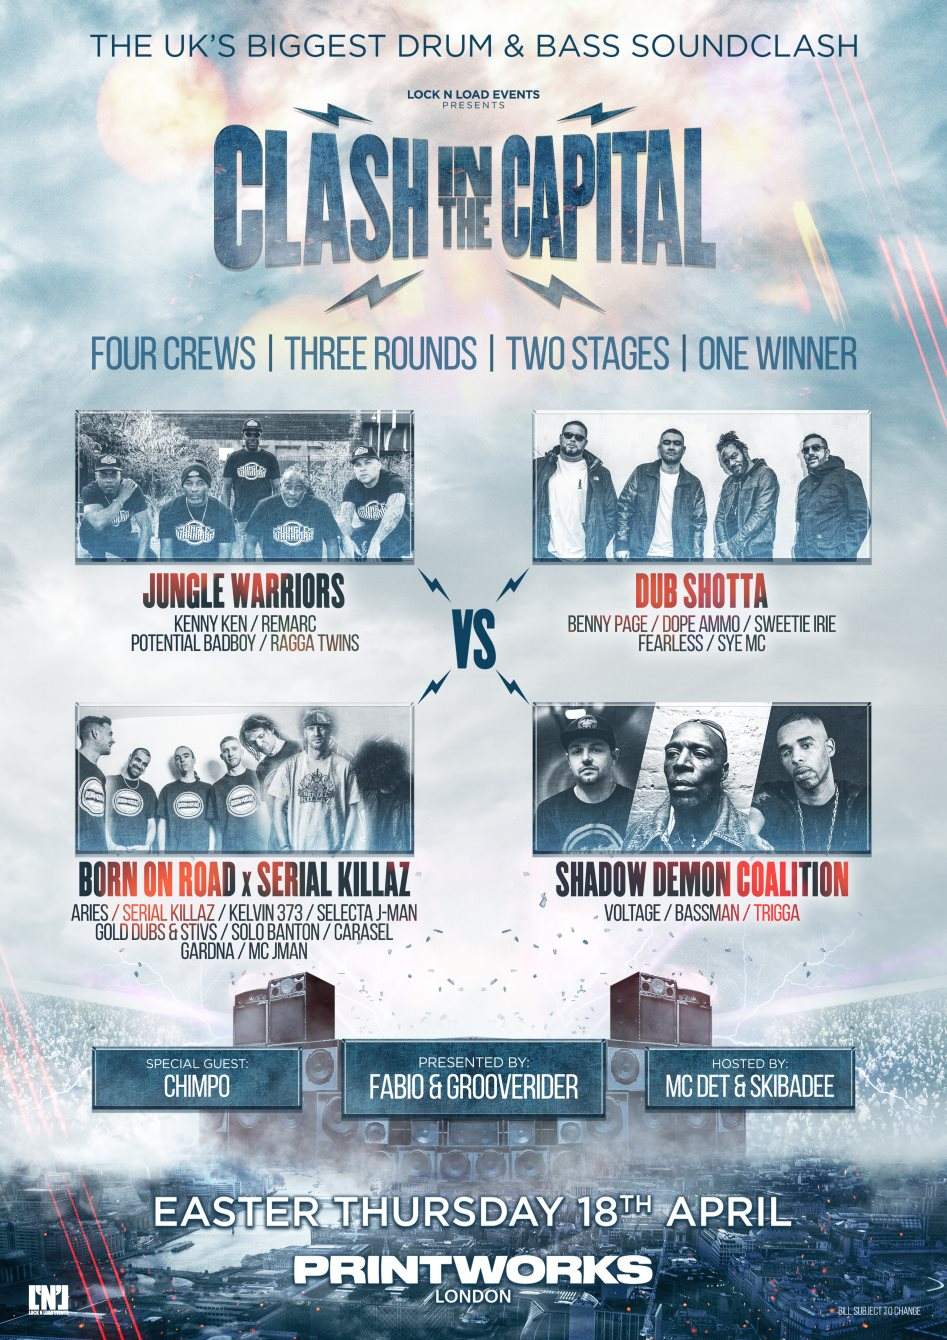 Clash In The Capital - The Uk's Biggest D&B Sound Clash - Página frontal